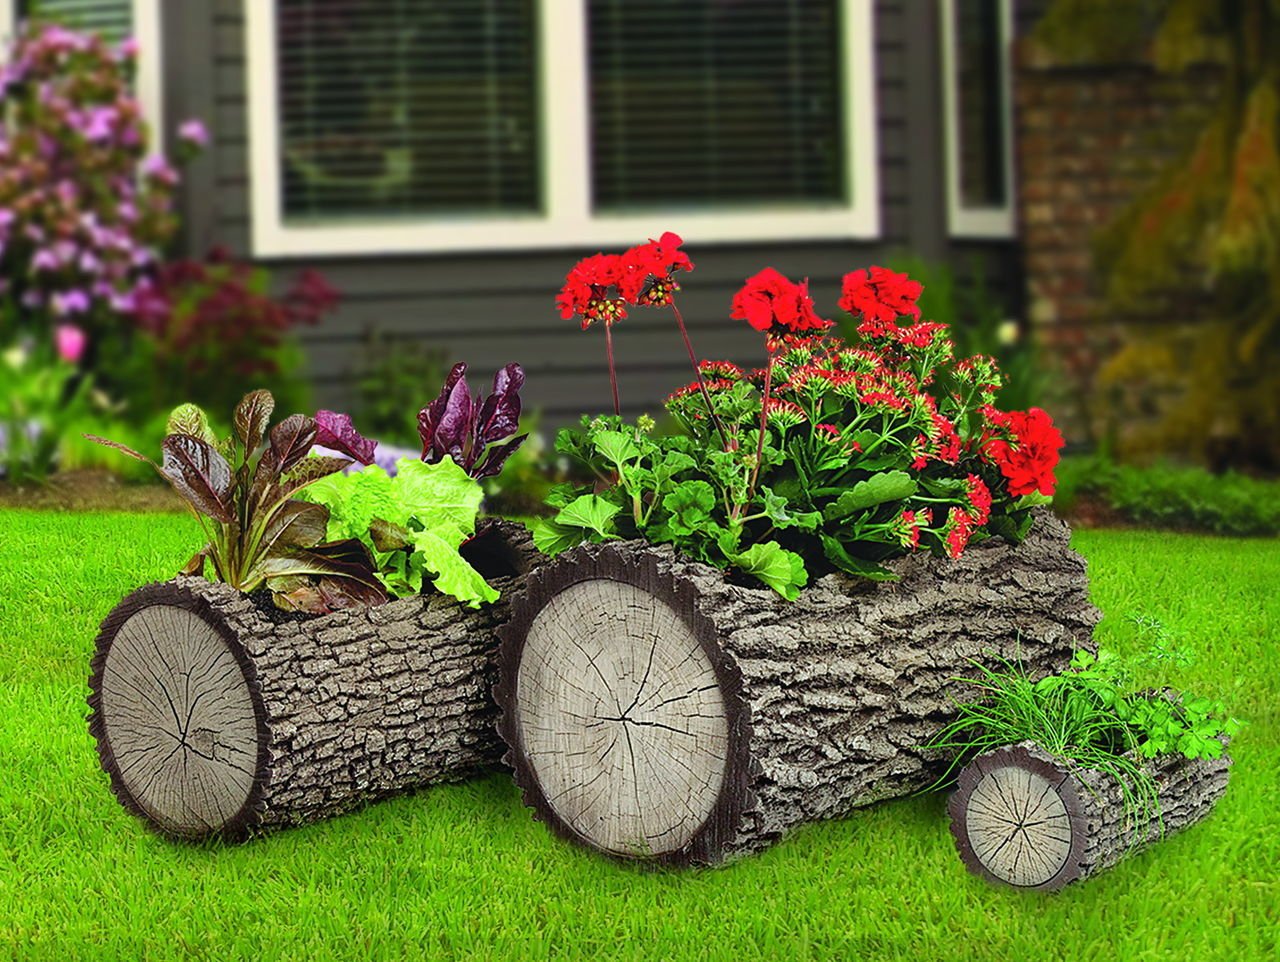 DIY Garden Projects: Crafting Flower Pots, Flower Beds, and Decorations